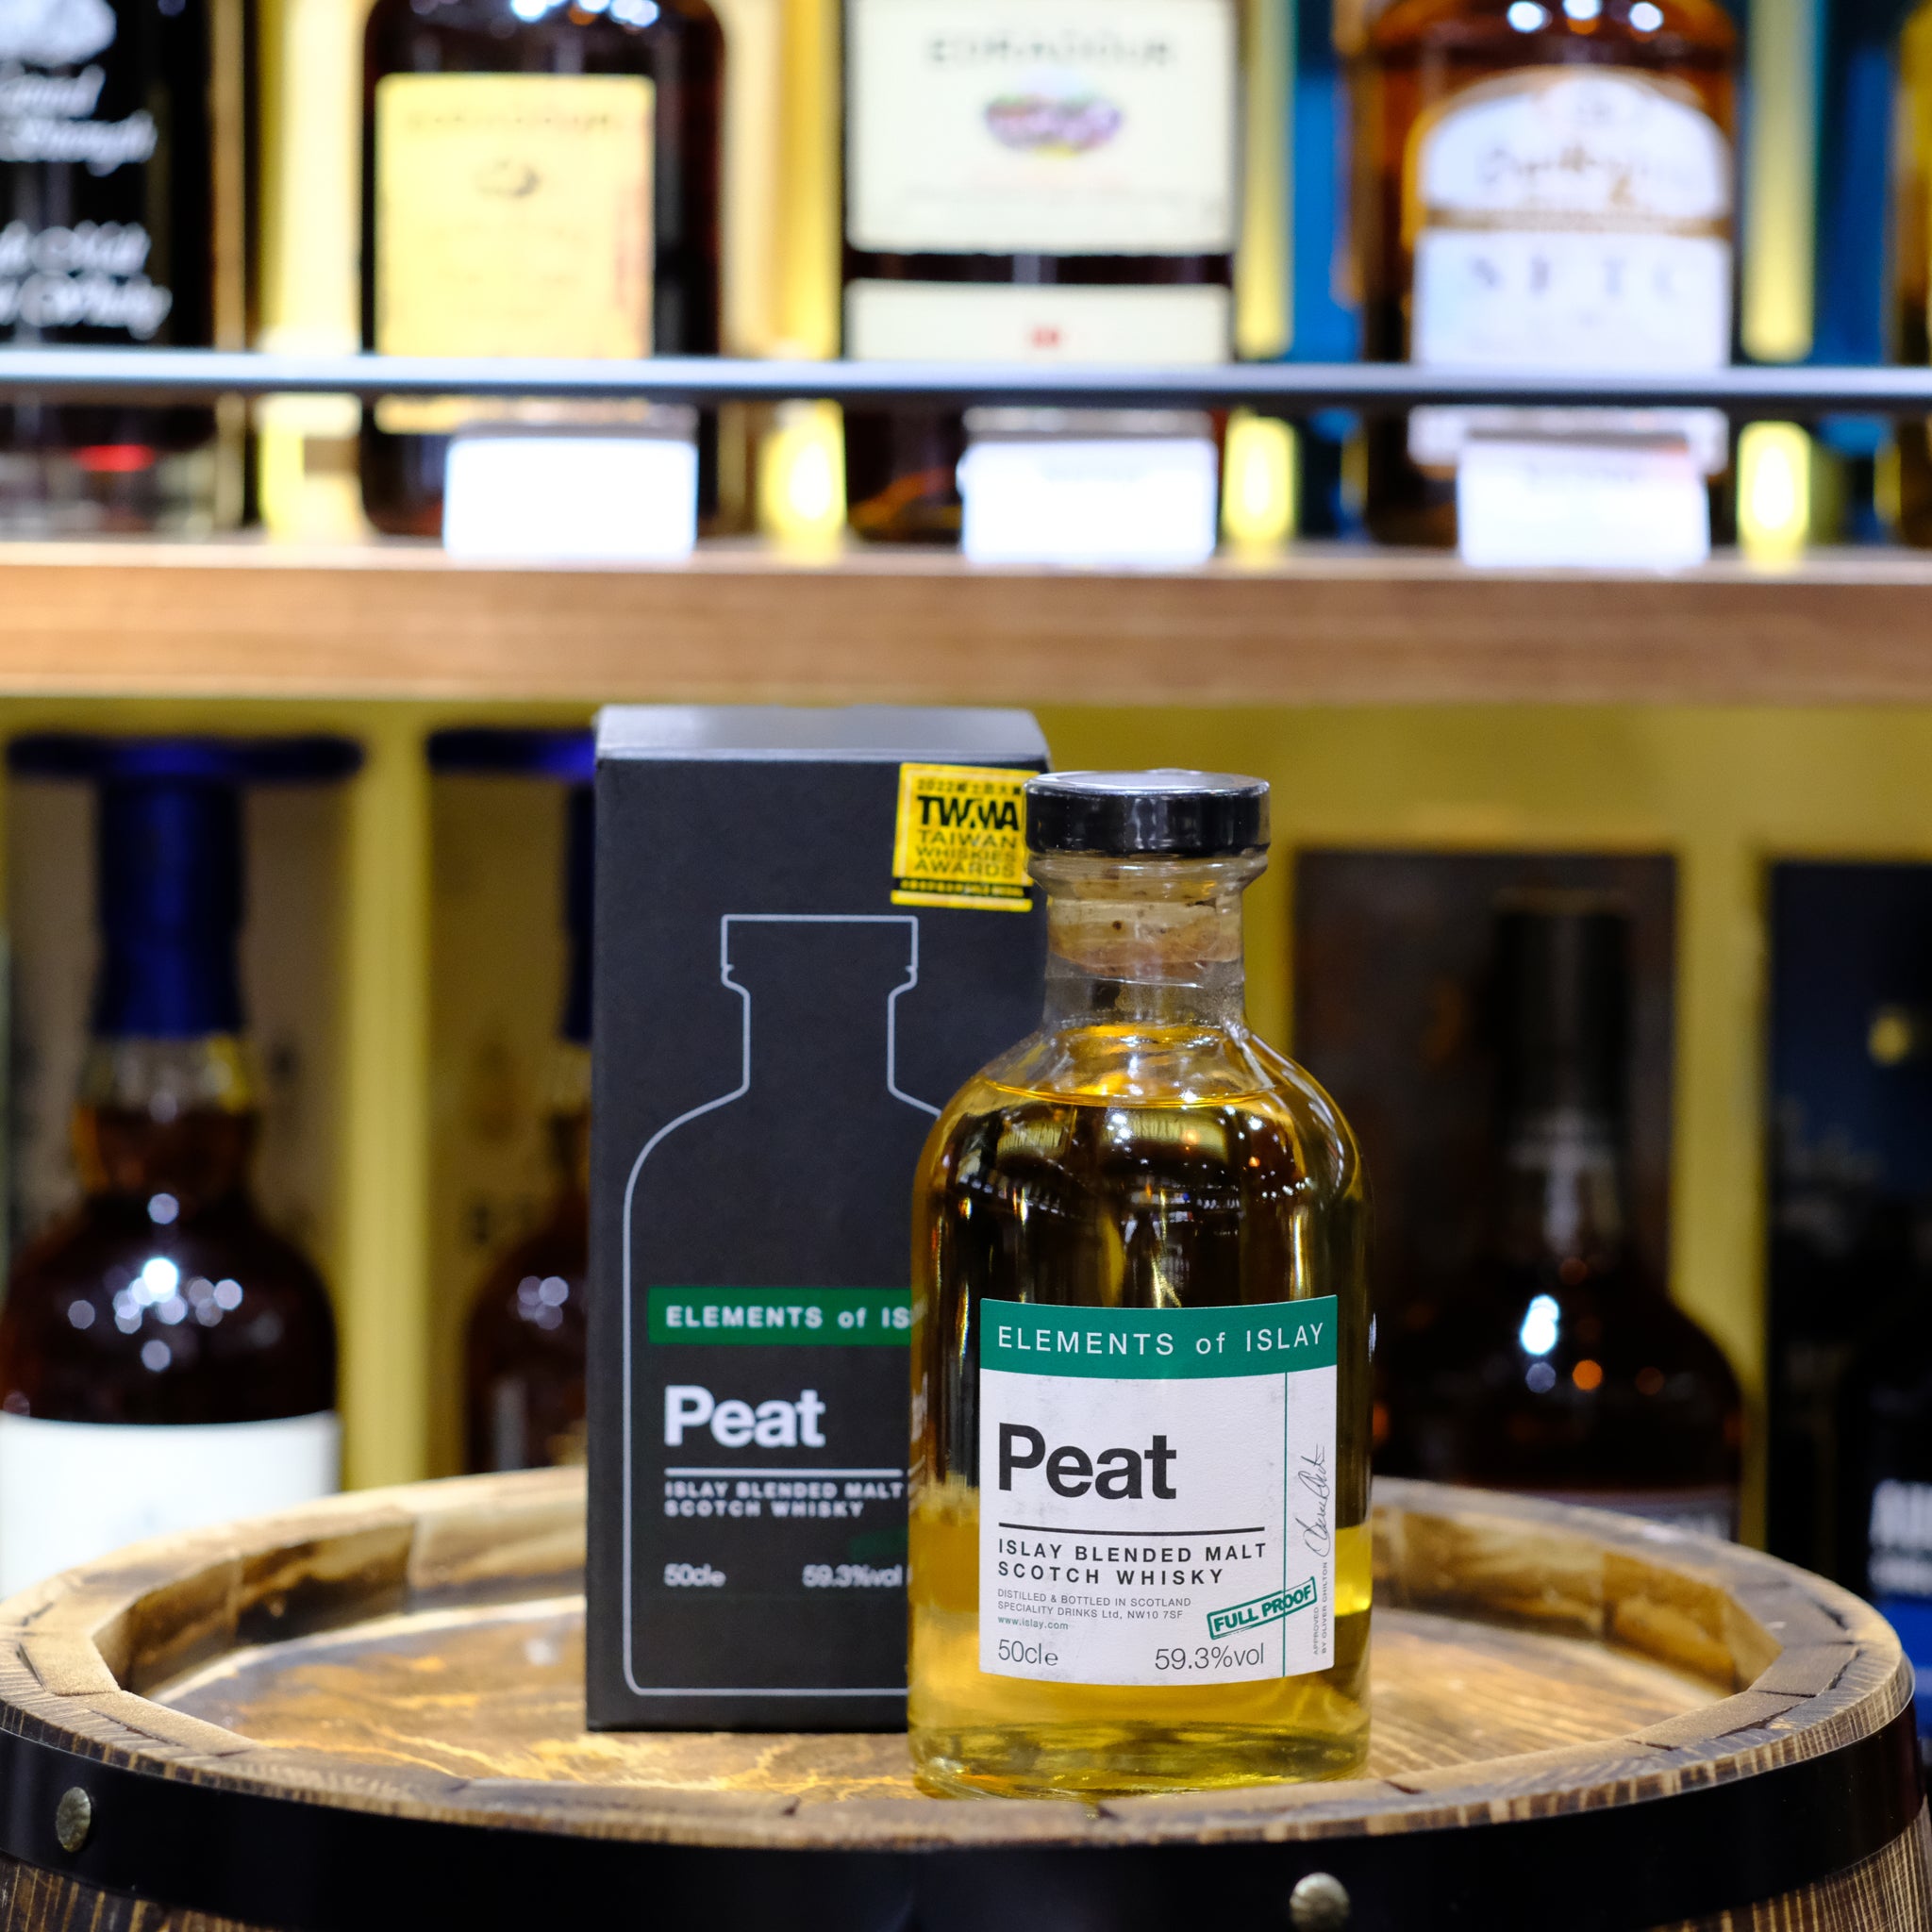 Elements of Islay Peat Full Proof Blended Malt Scotch Whisky